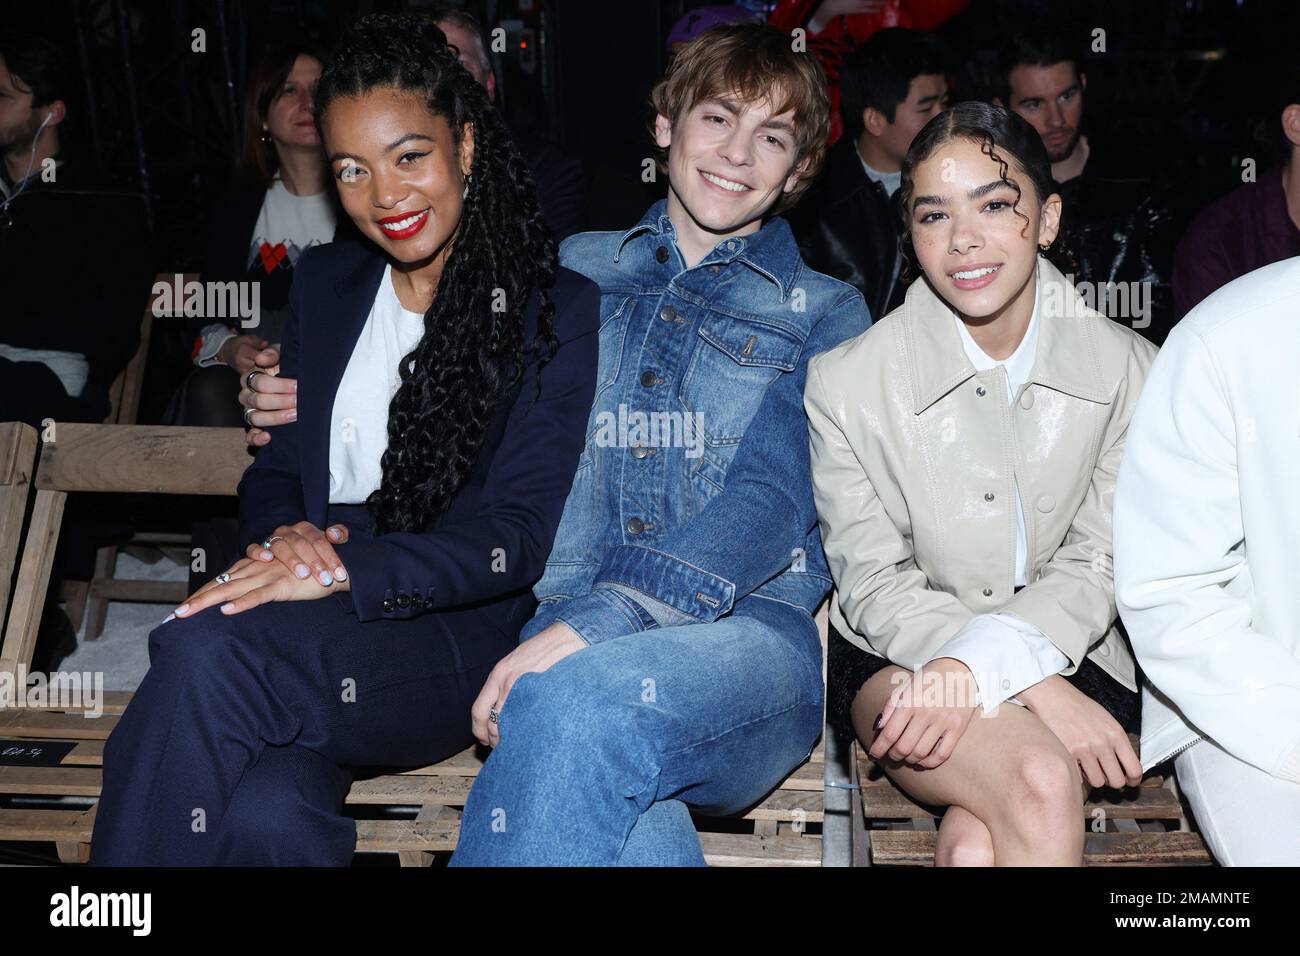 Paris, France. 19th Jan, 2023. Jaz Sinclair, Ross Lynch and Antonia Gentry attending the AMI - Alexandre Mattiussi Frontrow at the Paris Fashion Week - Menswear Fall-Winter 2023 as part of Paris Fashion Week on January 19, 2023 in Paris, France. Photo by Jerome Dominé/ABACAPRESS.COM Credit: Abaca Press/Alamy Live News Stock Photo